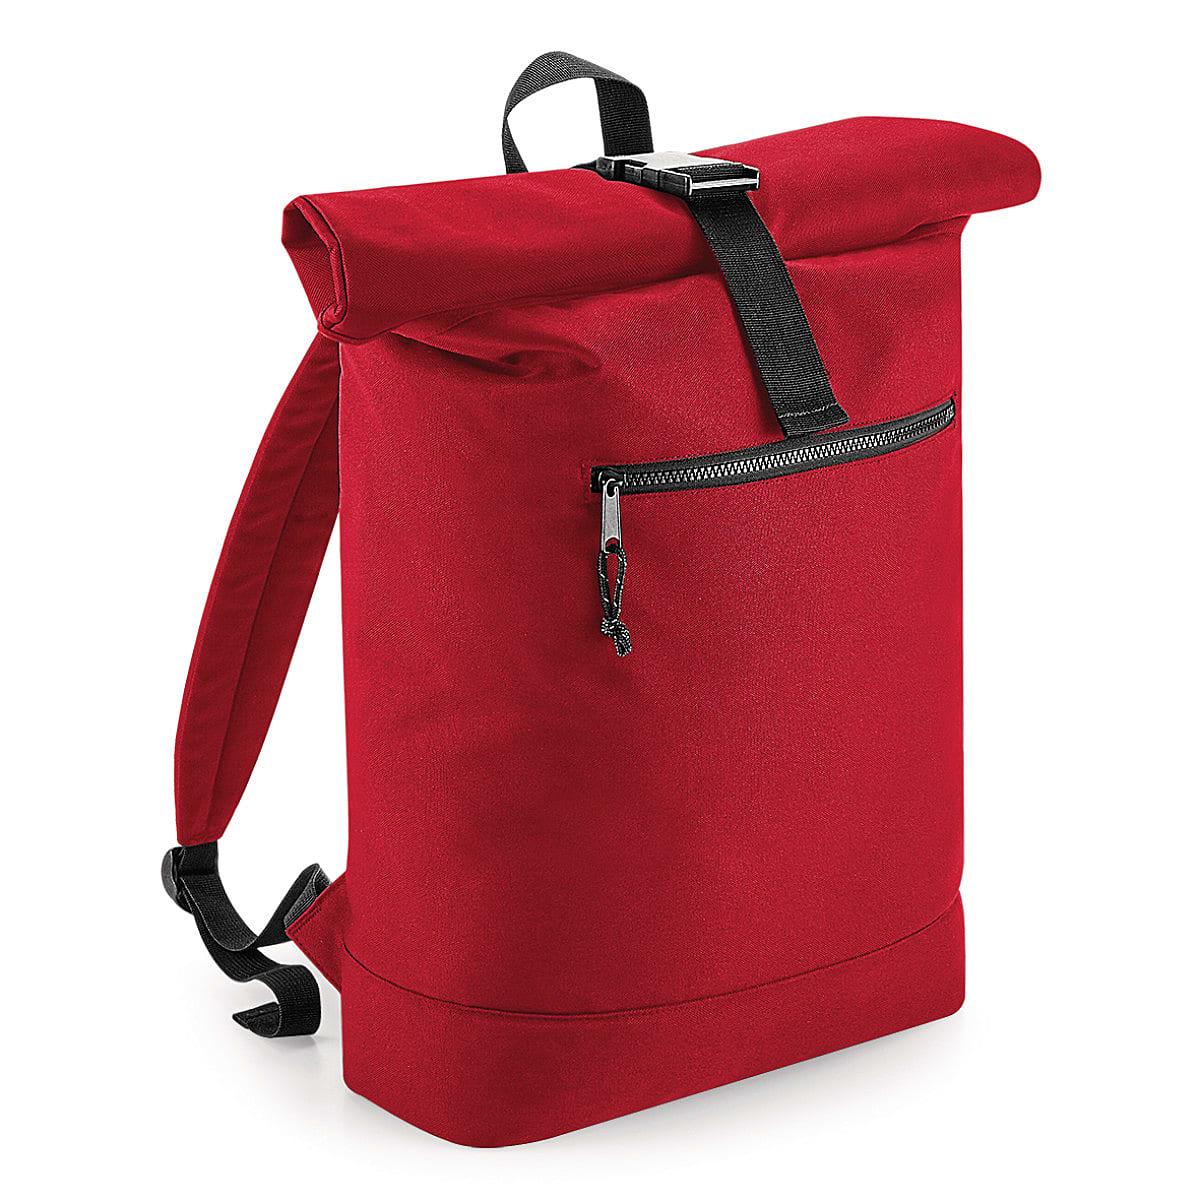 Bagbase Recycled Rolltop Backpack in Classic Red (Product Code: BG286)